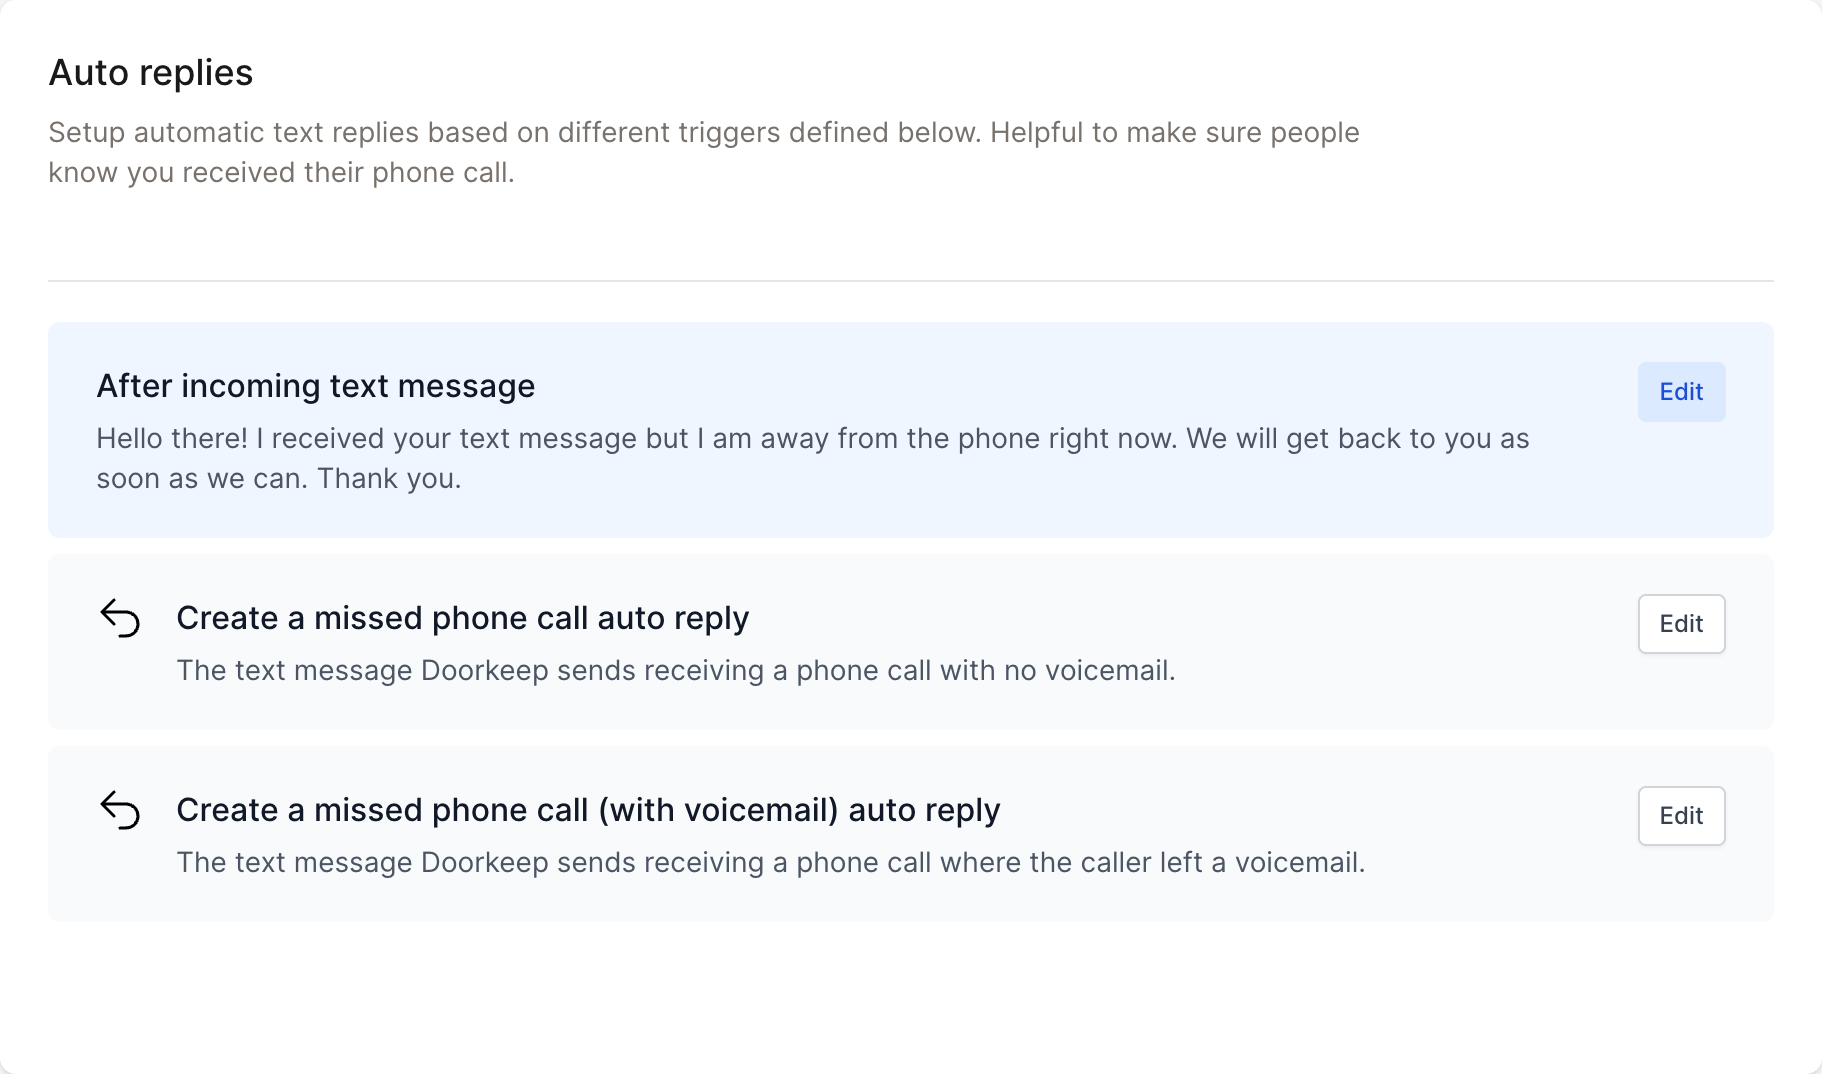 Auto replies allow you automate text message and phone call replies through text messages